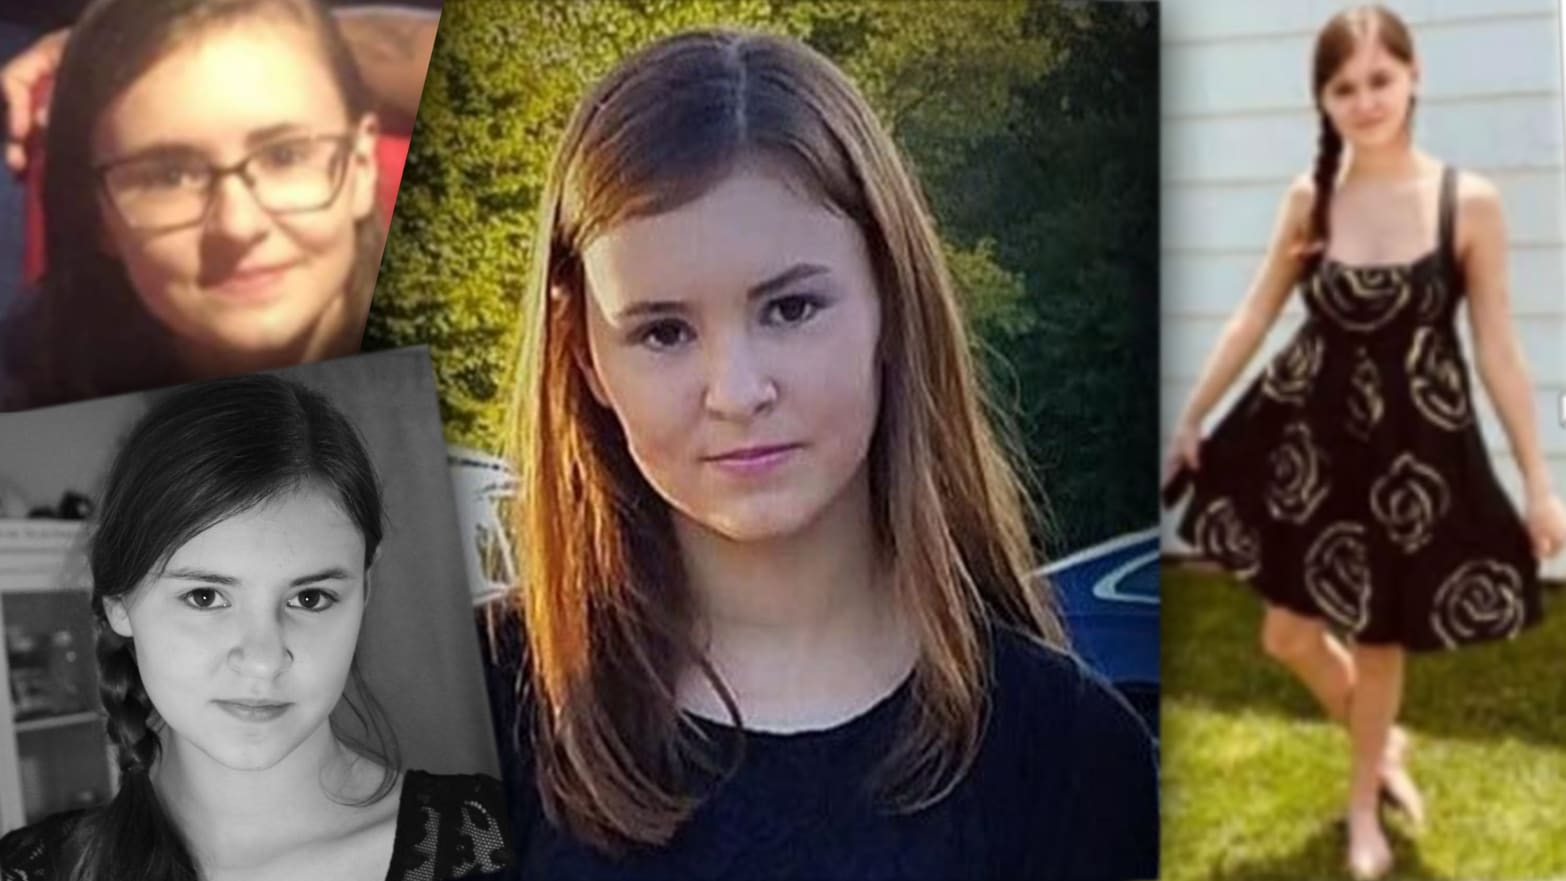 Delaware Teens Lured a Classmate Into Woods—Then Murdered Her With a Bat, Prosecutors Allege